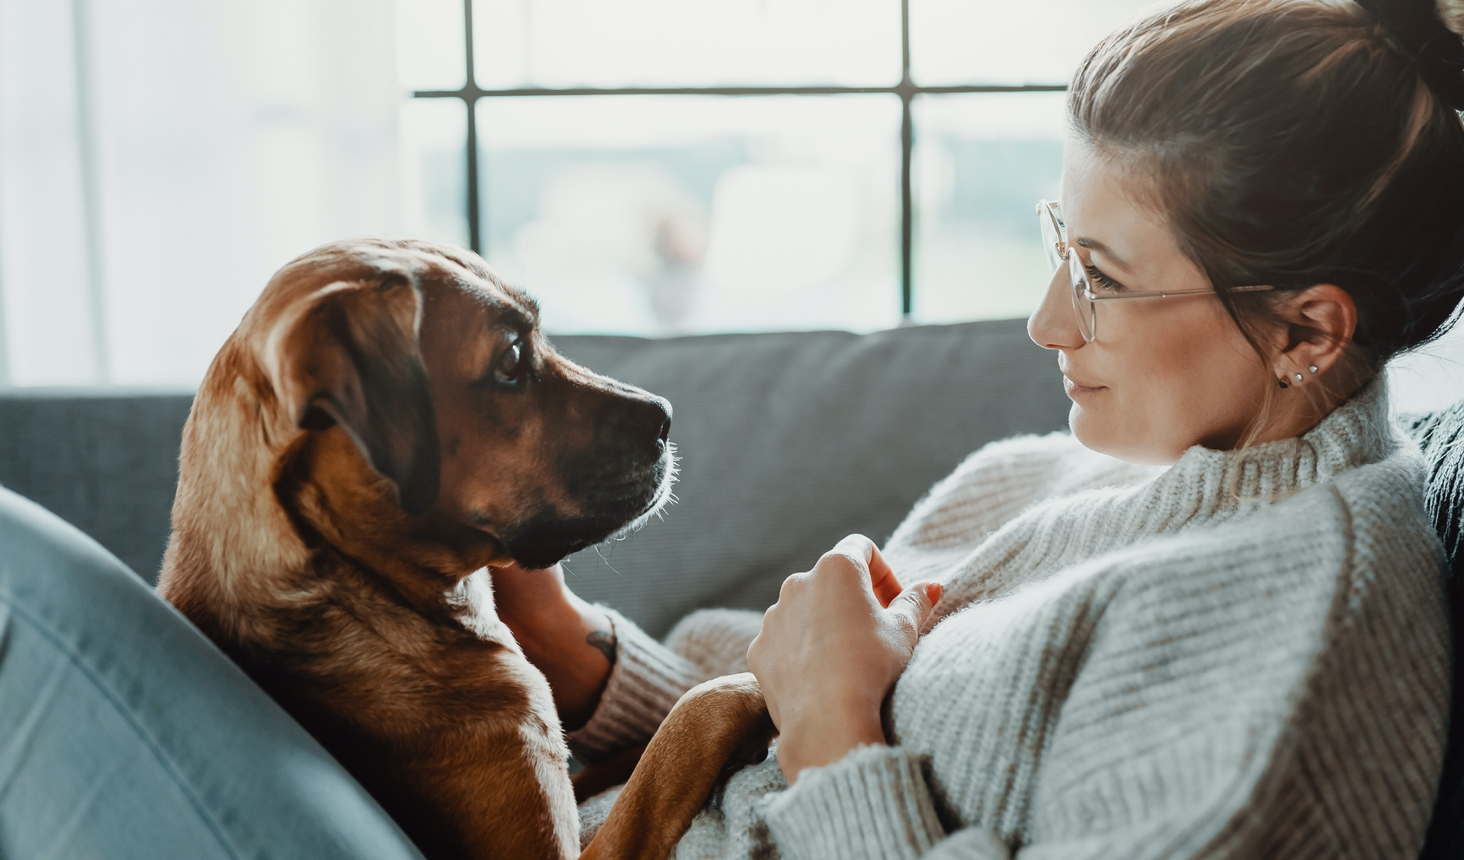 A woman reclines on the couch, sharing a tender gaze with her loyal dog, a bond of companionship and love captured in a single moment.